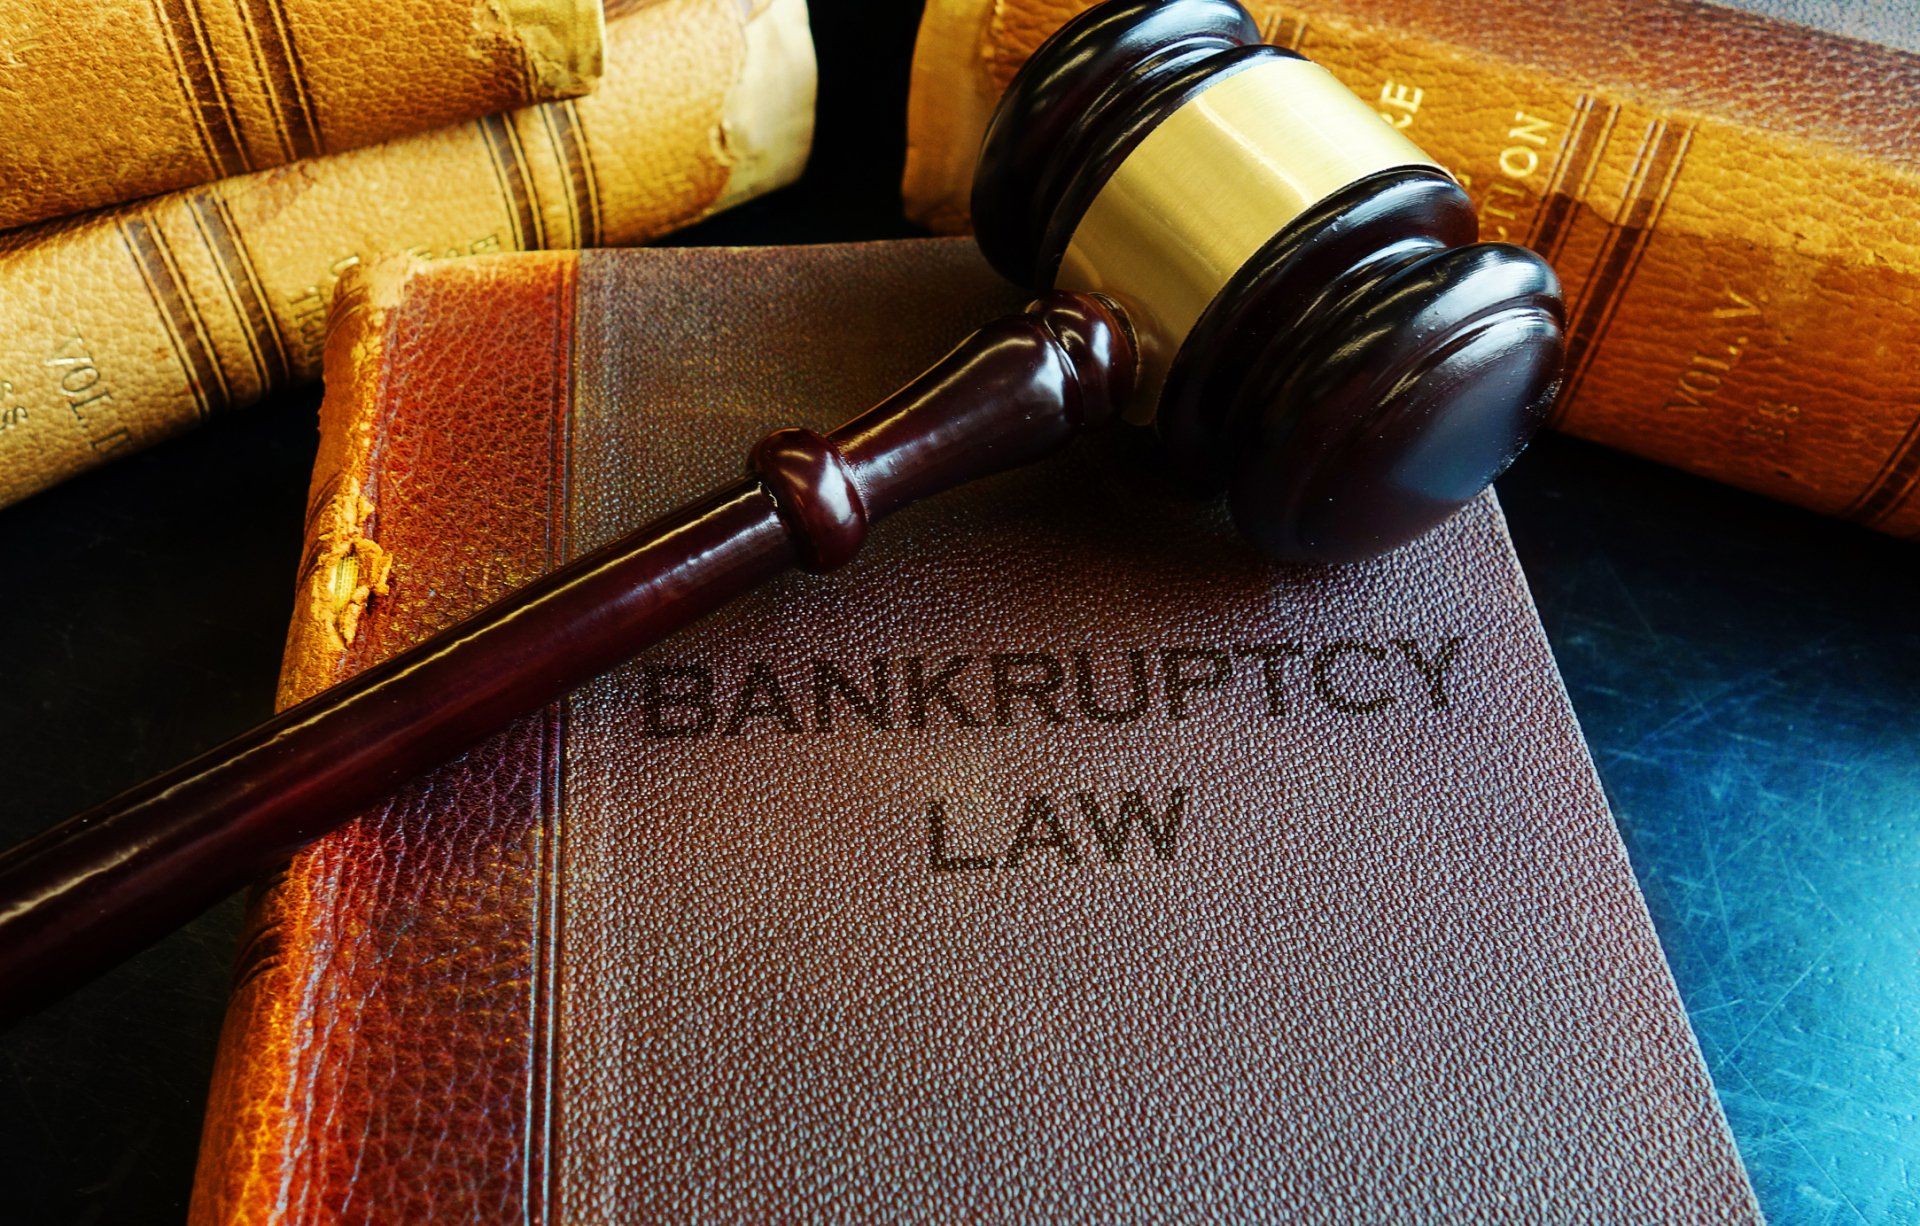 Bankruptcy Law — Mallet with Bankruptcy book in Hutchinson, KS